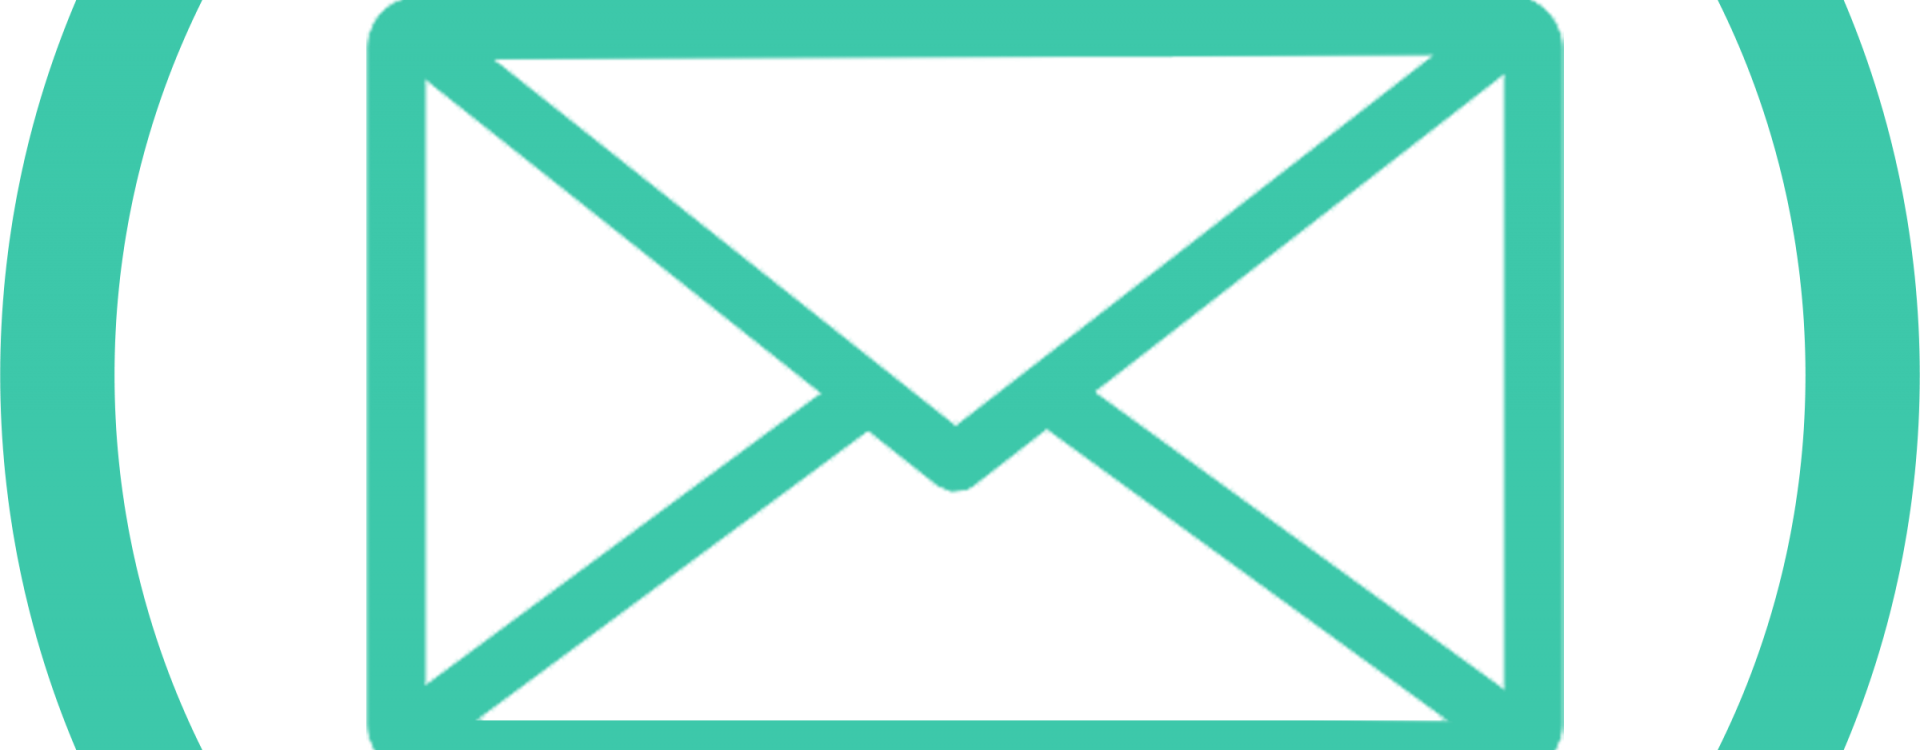 Email Icon 23 - Envelope Outline (1920x750)